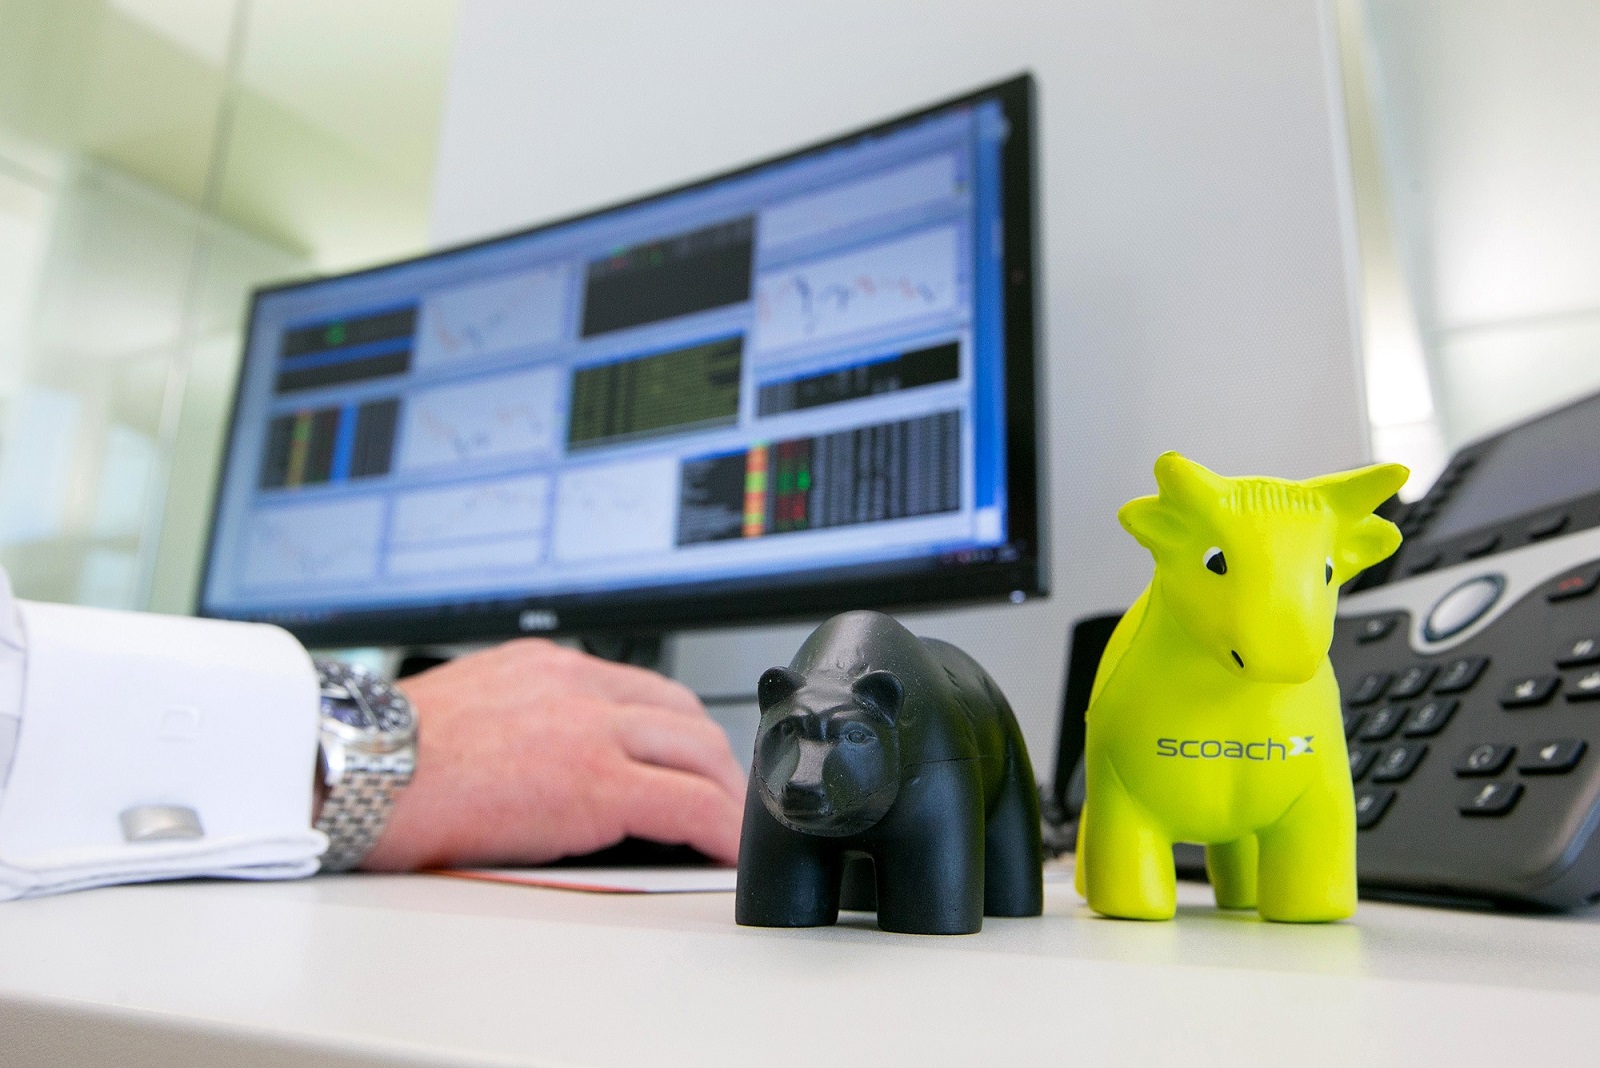 An employee monitors financial data as toy bear and bull figurines sit on a desk inside FinTech Group AG's campus offices.
